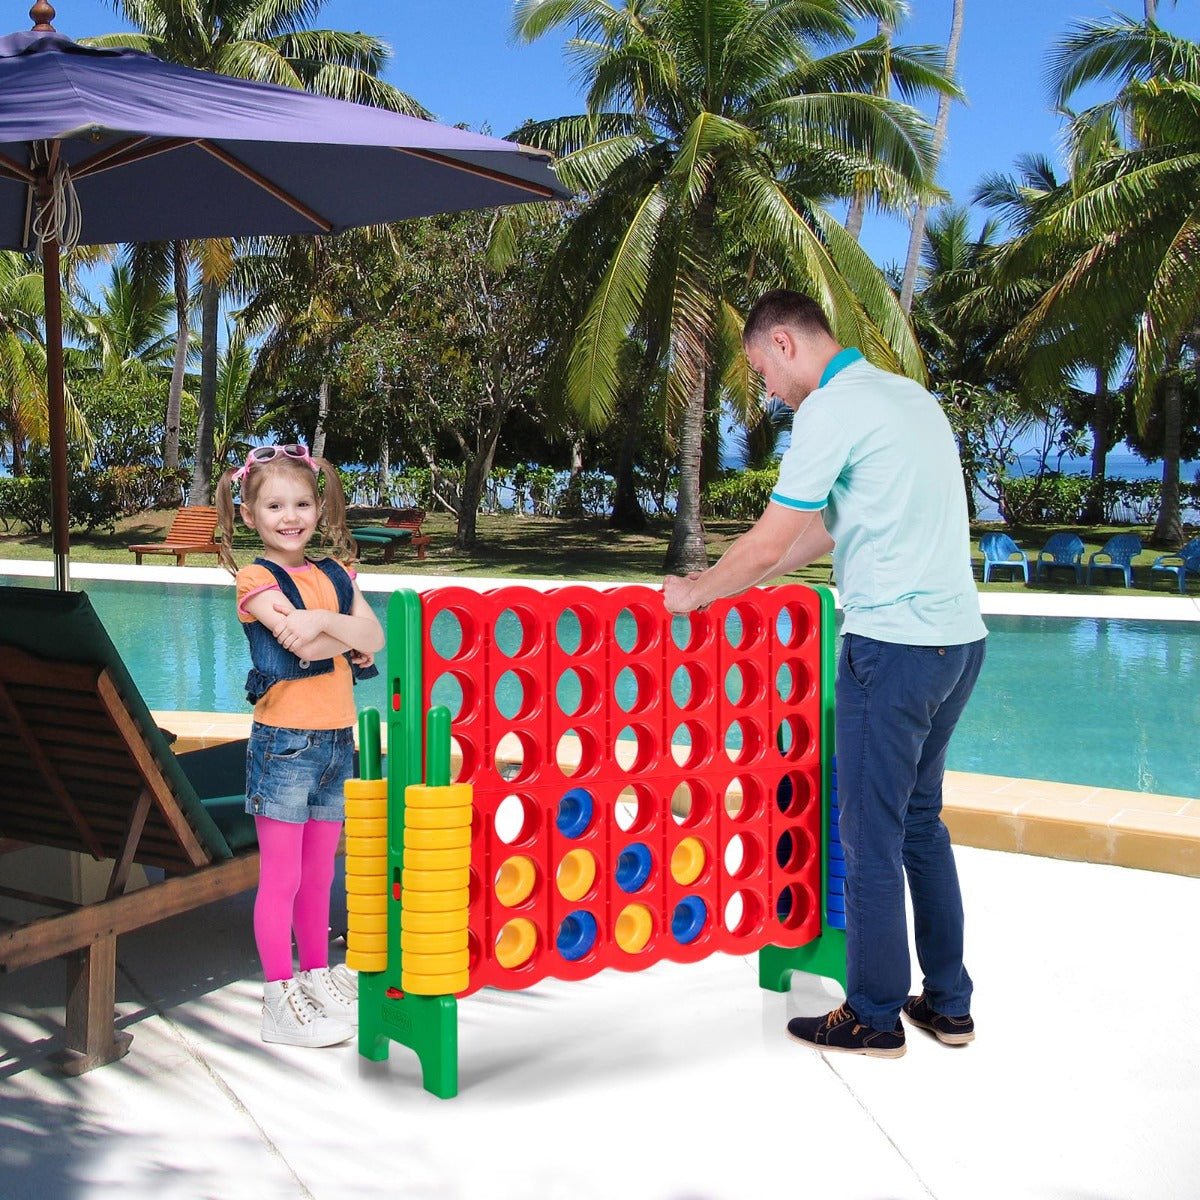 Giant Connect 4 Game - 42 Jumbo Rings for Beach and Garden Play